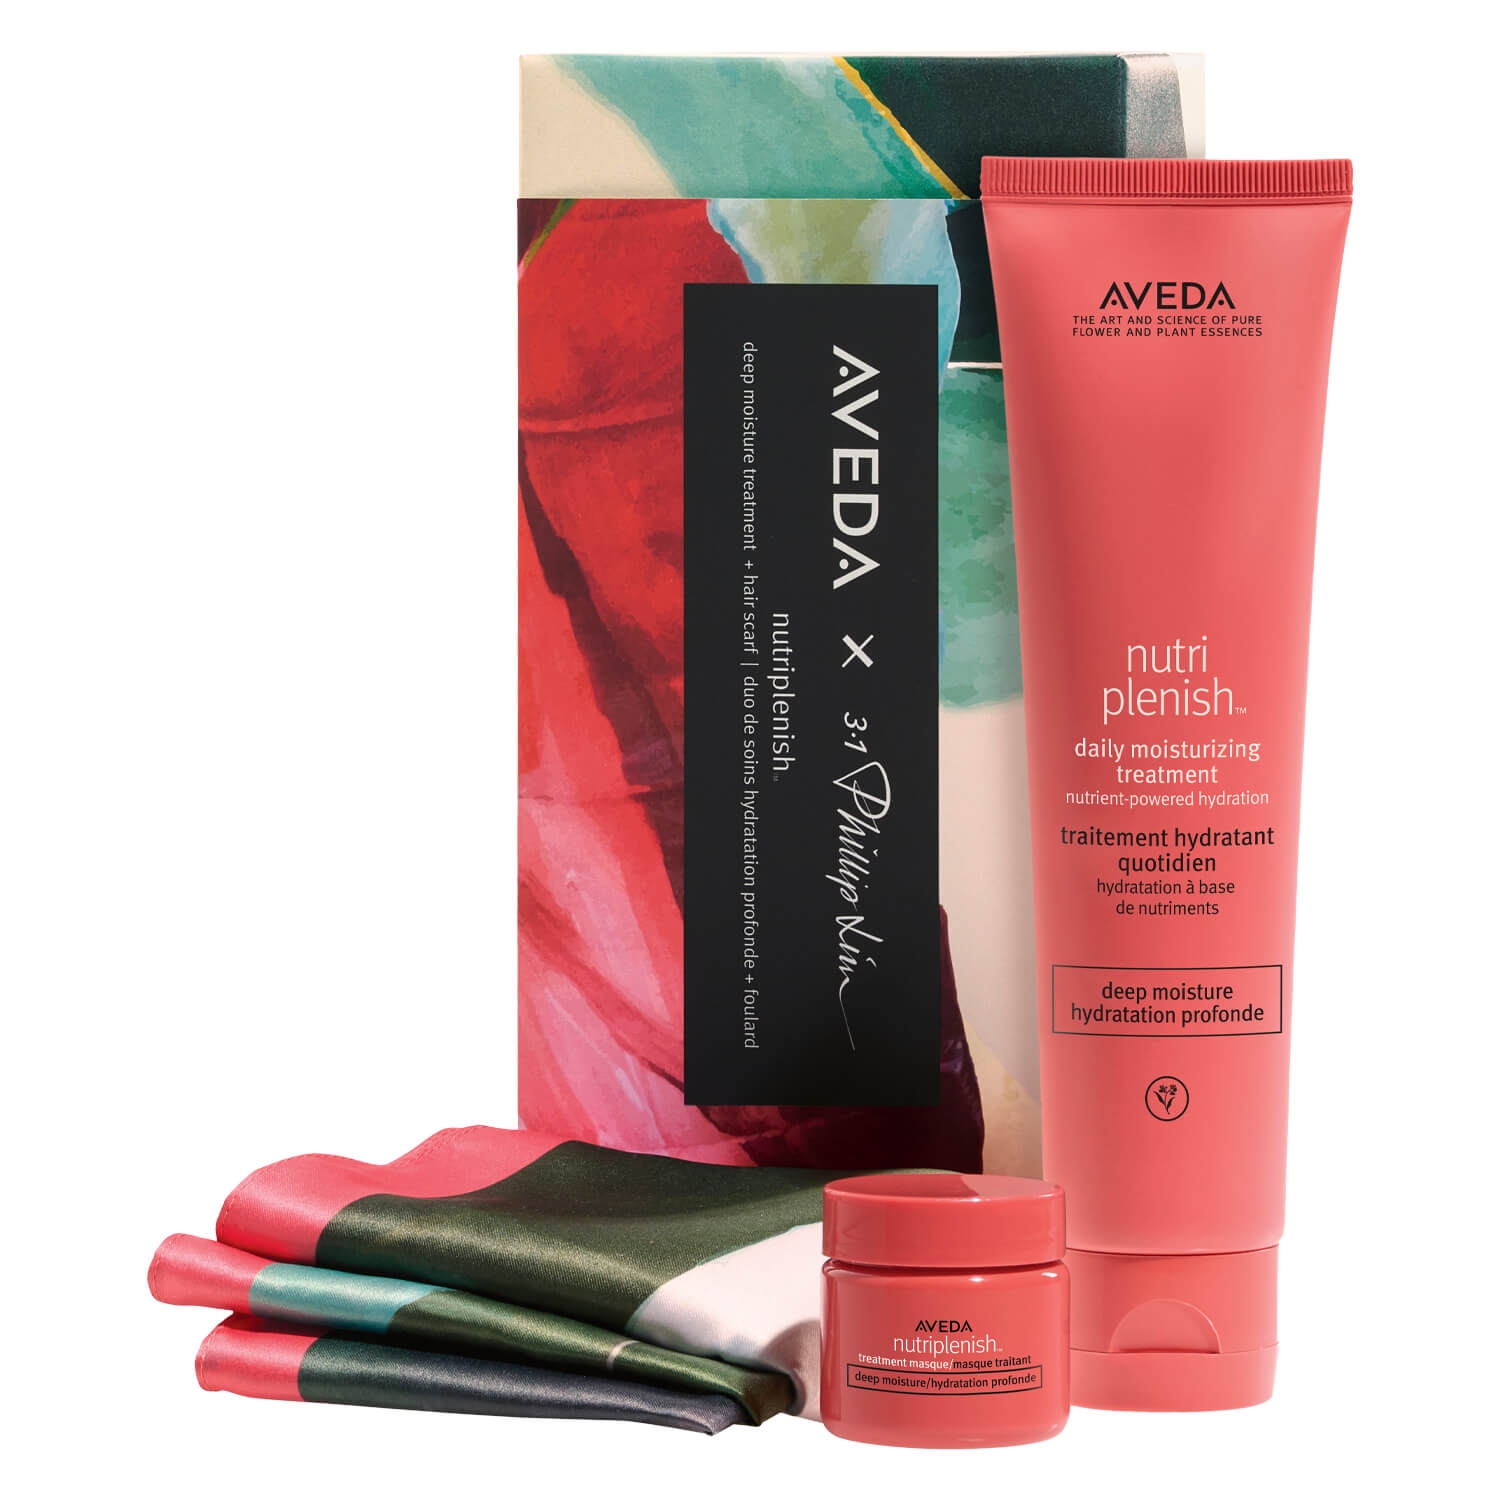 Product image from aveda specials - nutriplenish deep moisture essentials